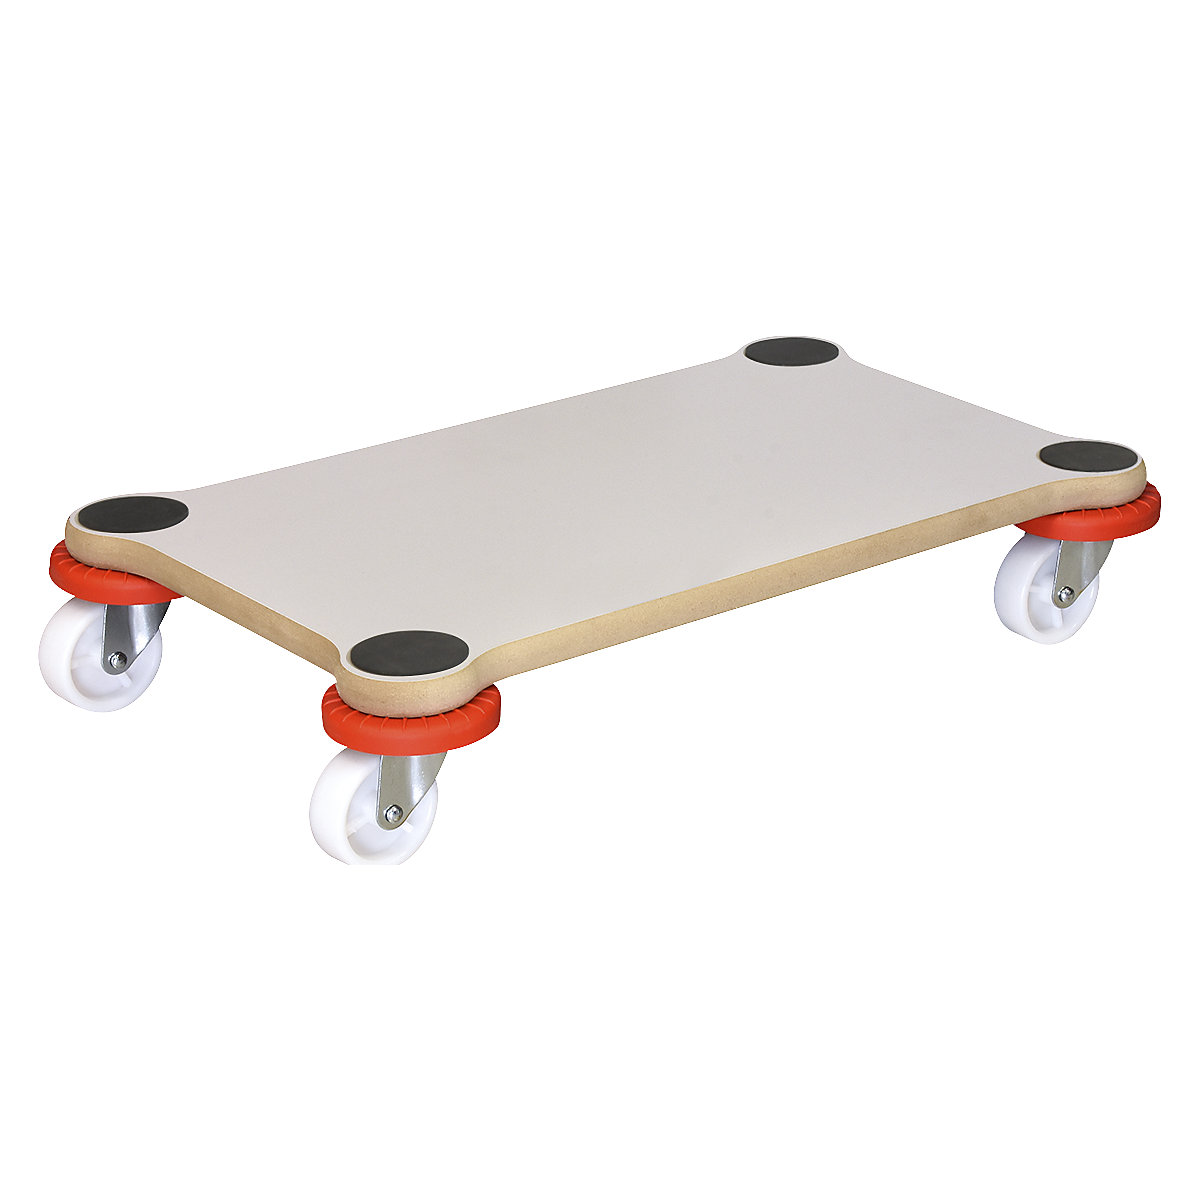 PROTECTION MM 1363 transport dolly – Wagner, LxW 520 x 320 mm, pack of 2, max. load 200 kg, 5+ packs-4